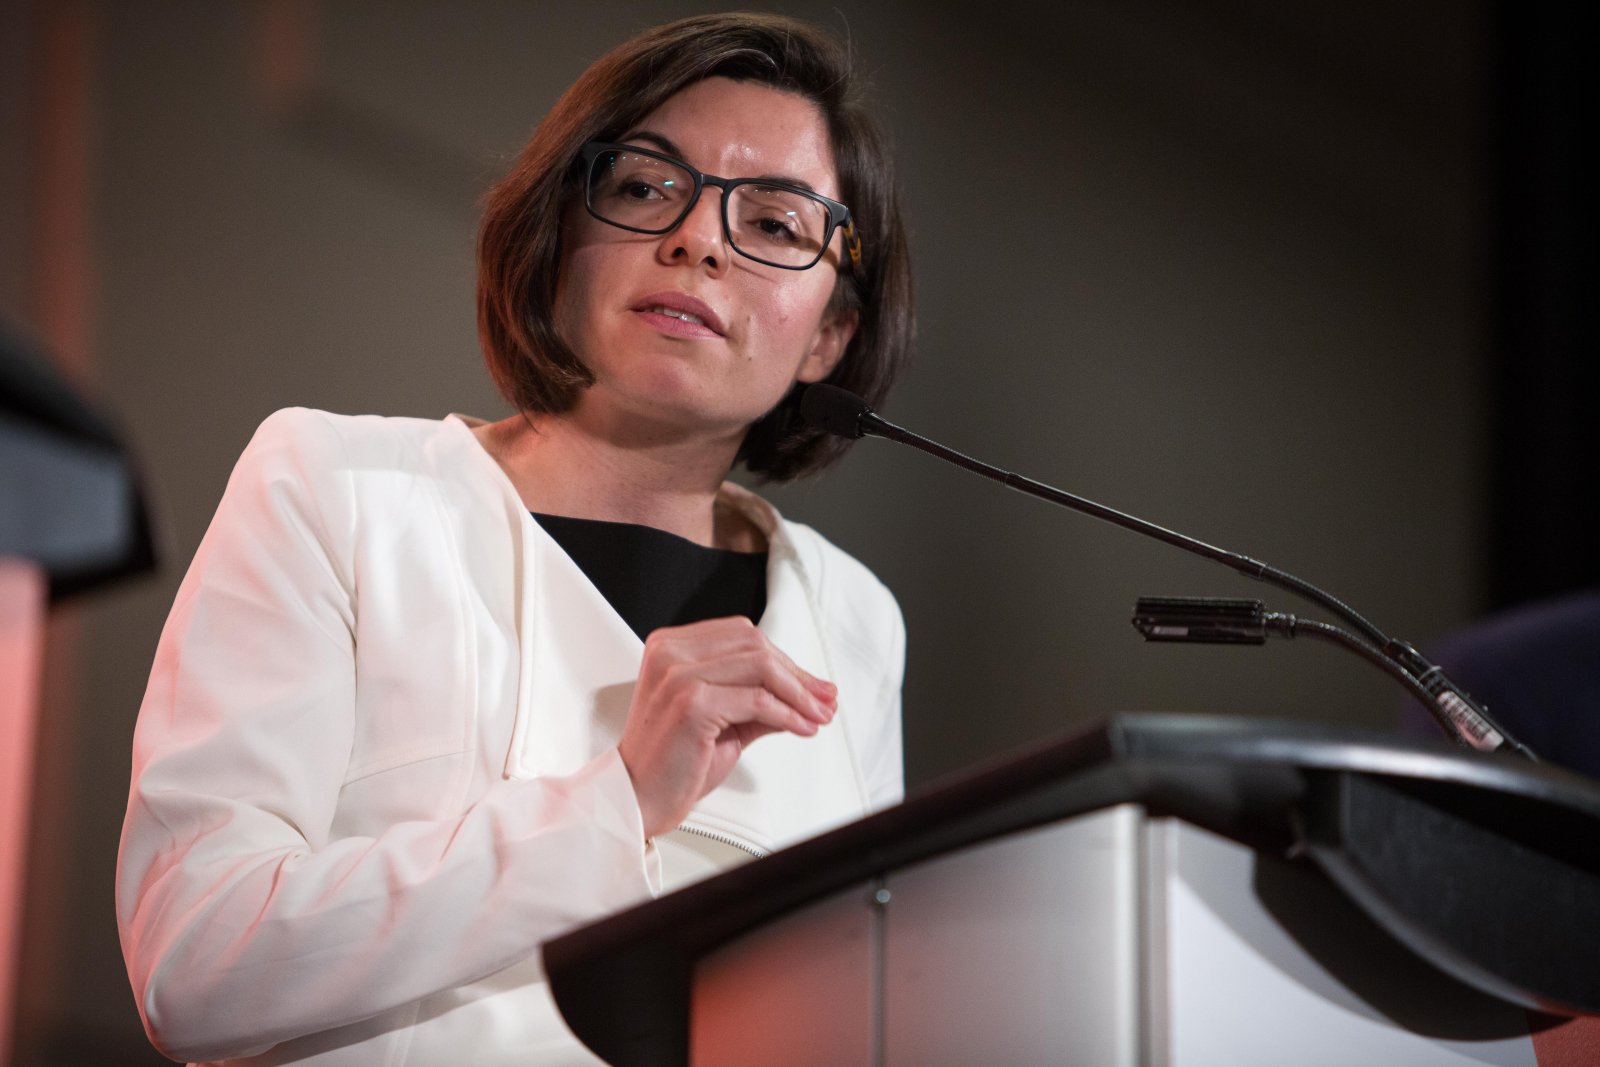 Manitoba NDP MP Niki Ashton is one of four candidates vying for the party's leadership.